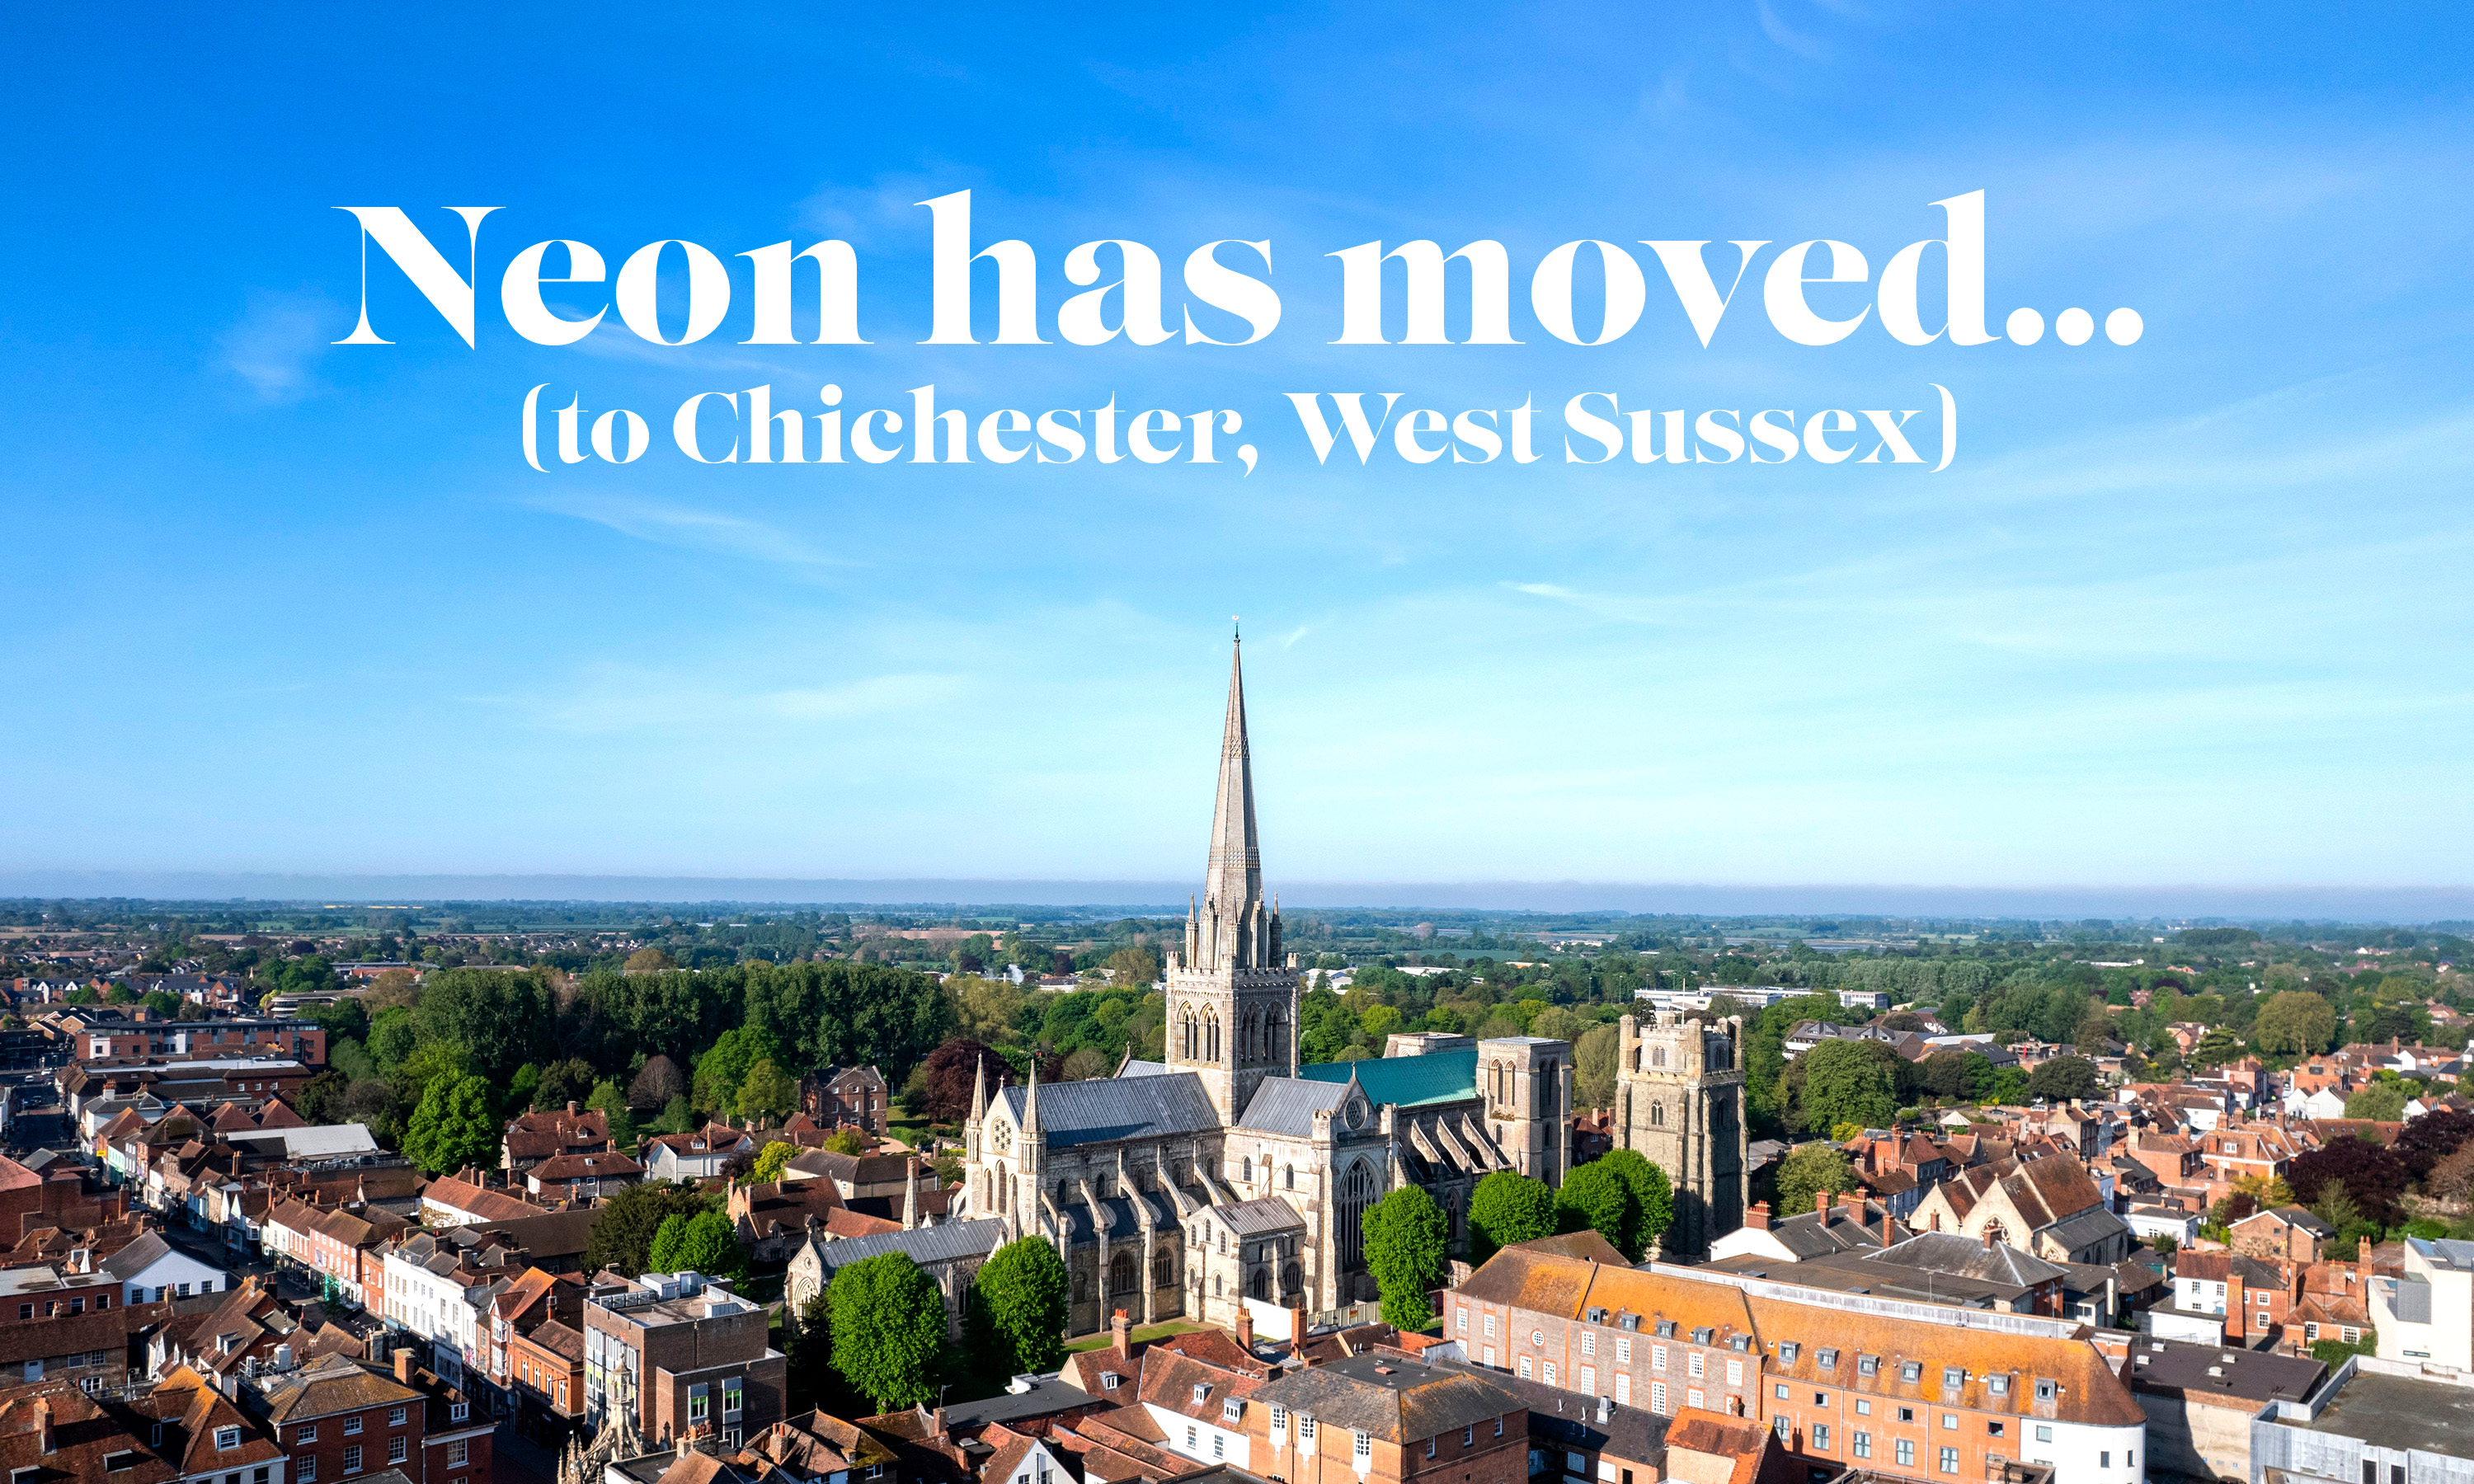 Neon branding agency has moved to Chichester in West Sussex